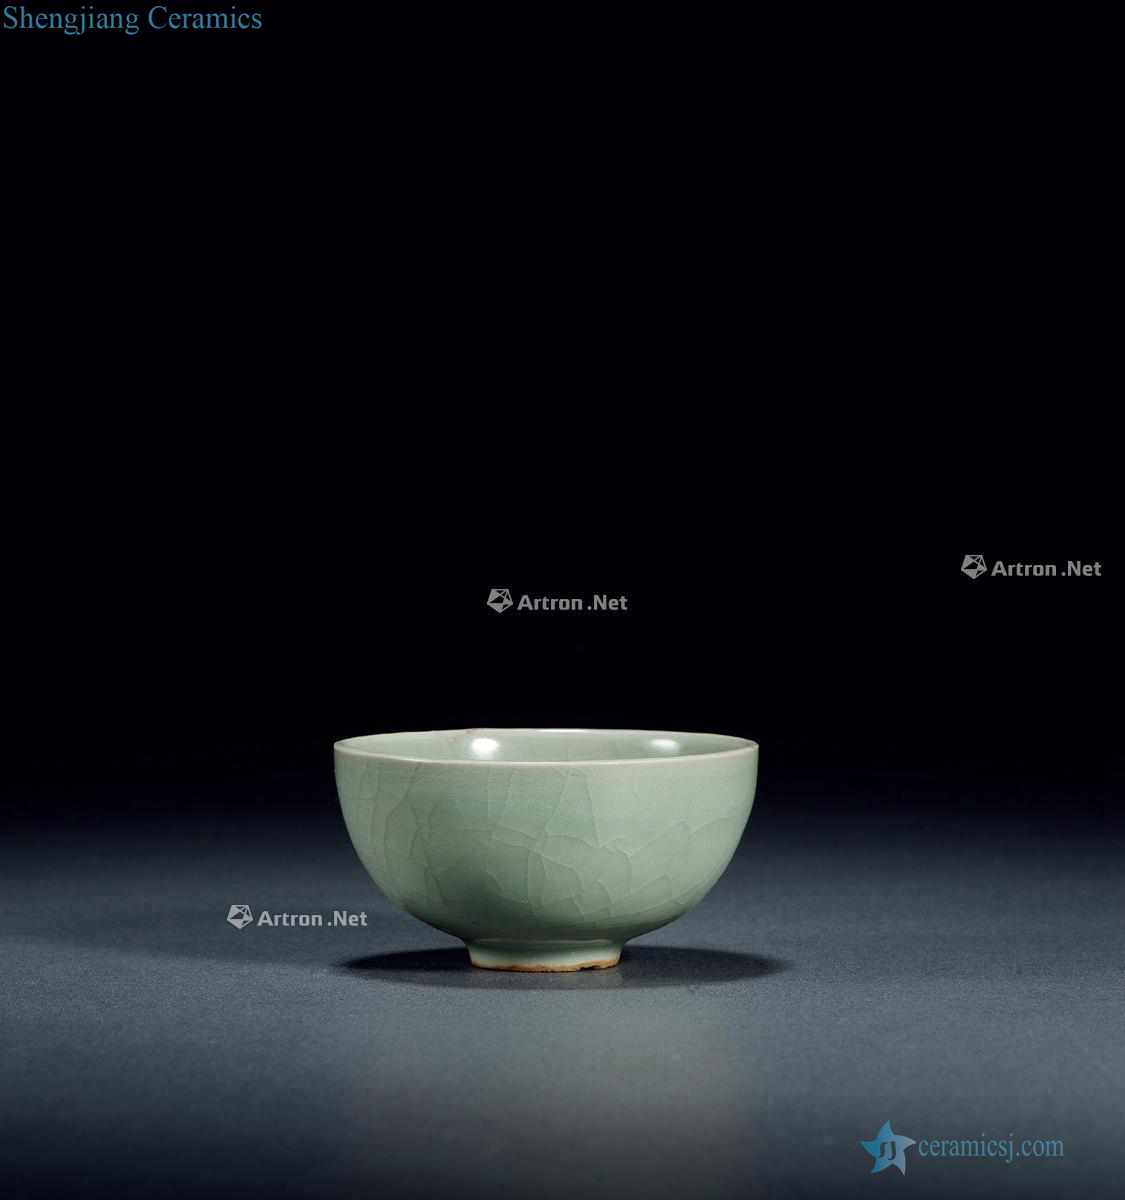 The southern song dynasty, longquan celadon powder blue glaze cup